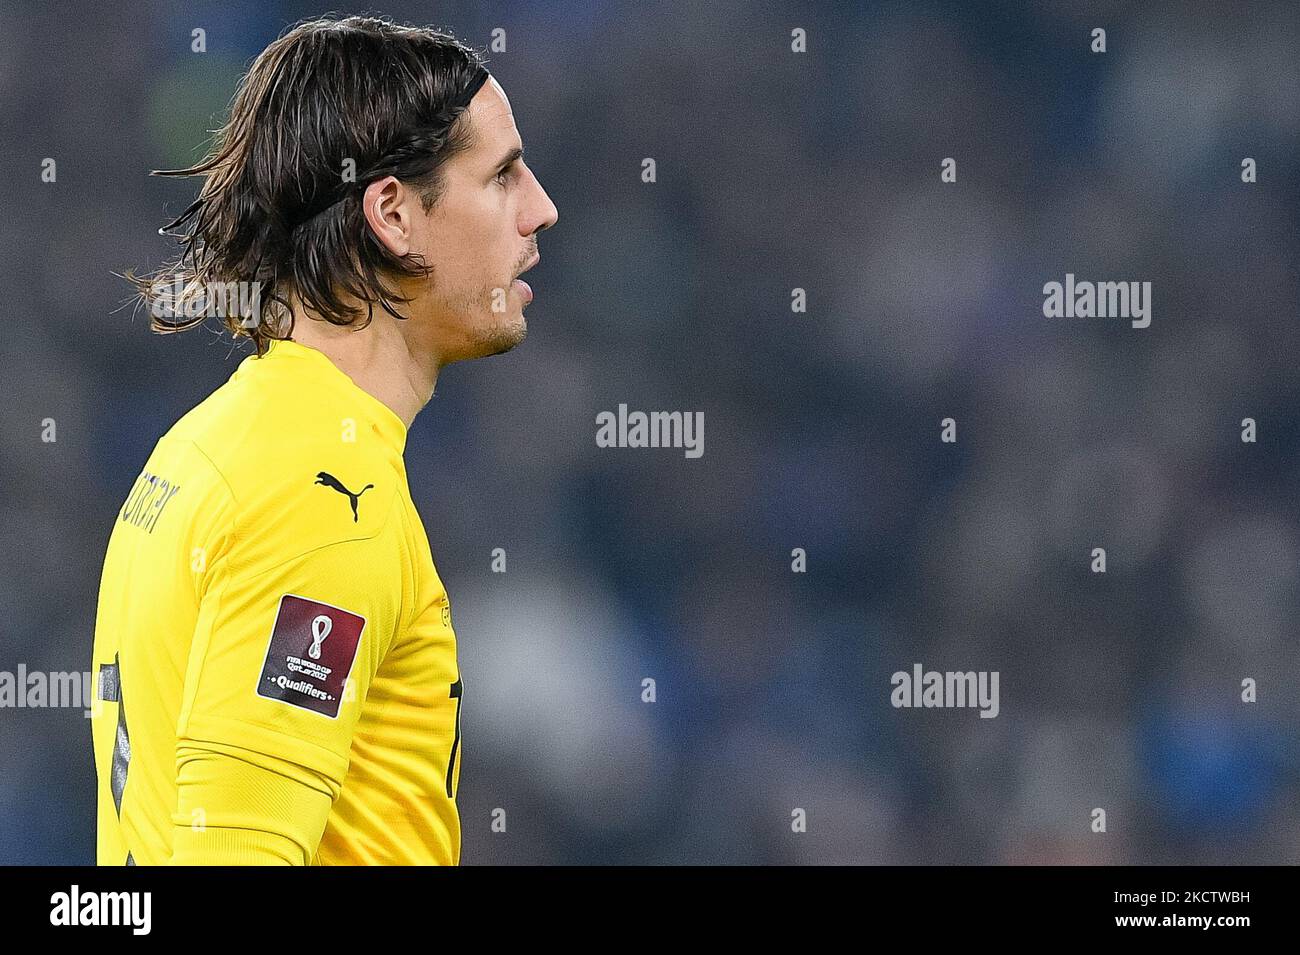 Yann Sommer of Switzerland looks on during the World Cup 2022 qualifier football match between Italy and Switzerland at Stadio Olimpico, Rome, Italy on 12 November 2021. (Photo by Giuseppe Maffia/NurPhoto) Stock Photo